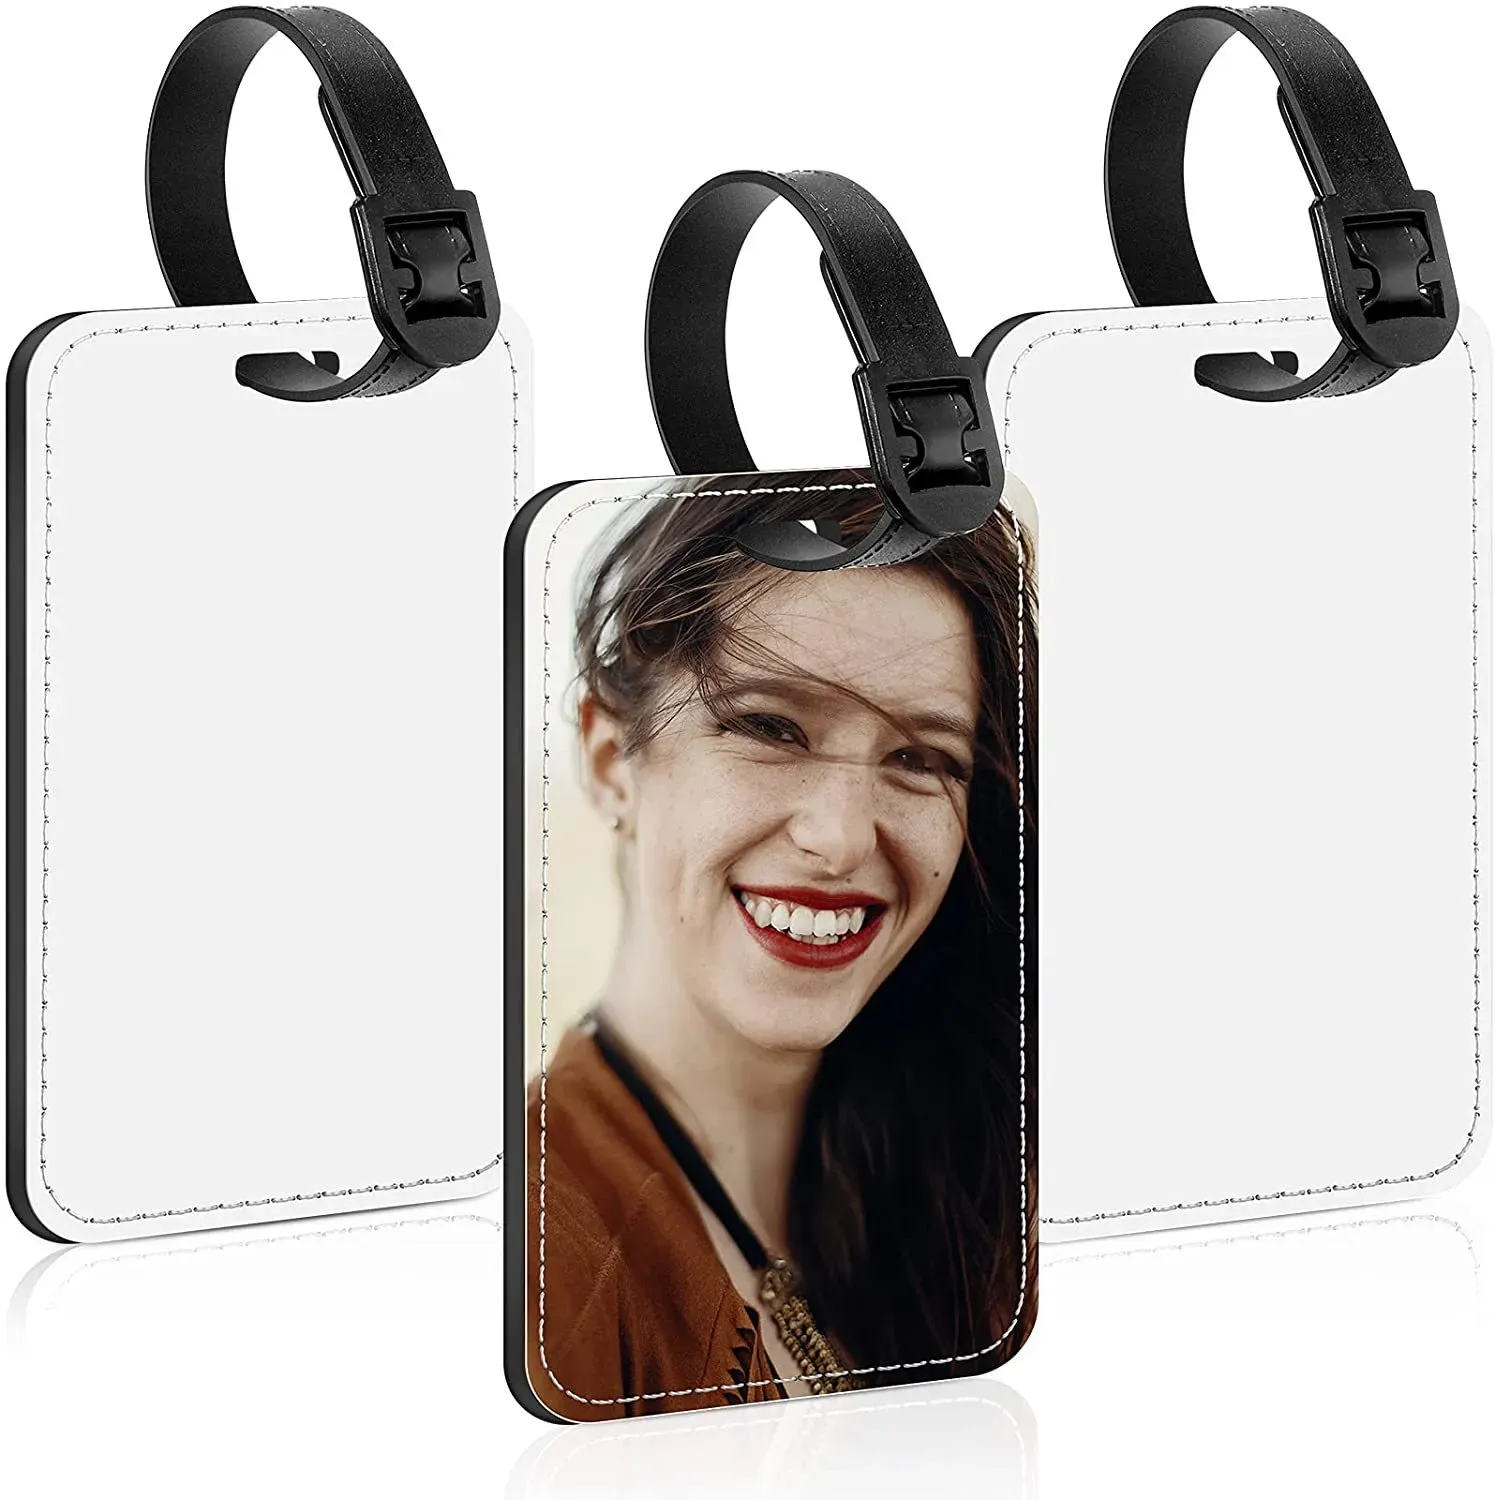 Sublimation blanks Neoprene Luggage Tags White Blank Travel Tags with Strap Double Sides Suitcase Label Tag Heat Transfer DIY Name ID Card 4 x 2.75 Inch